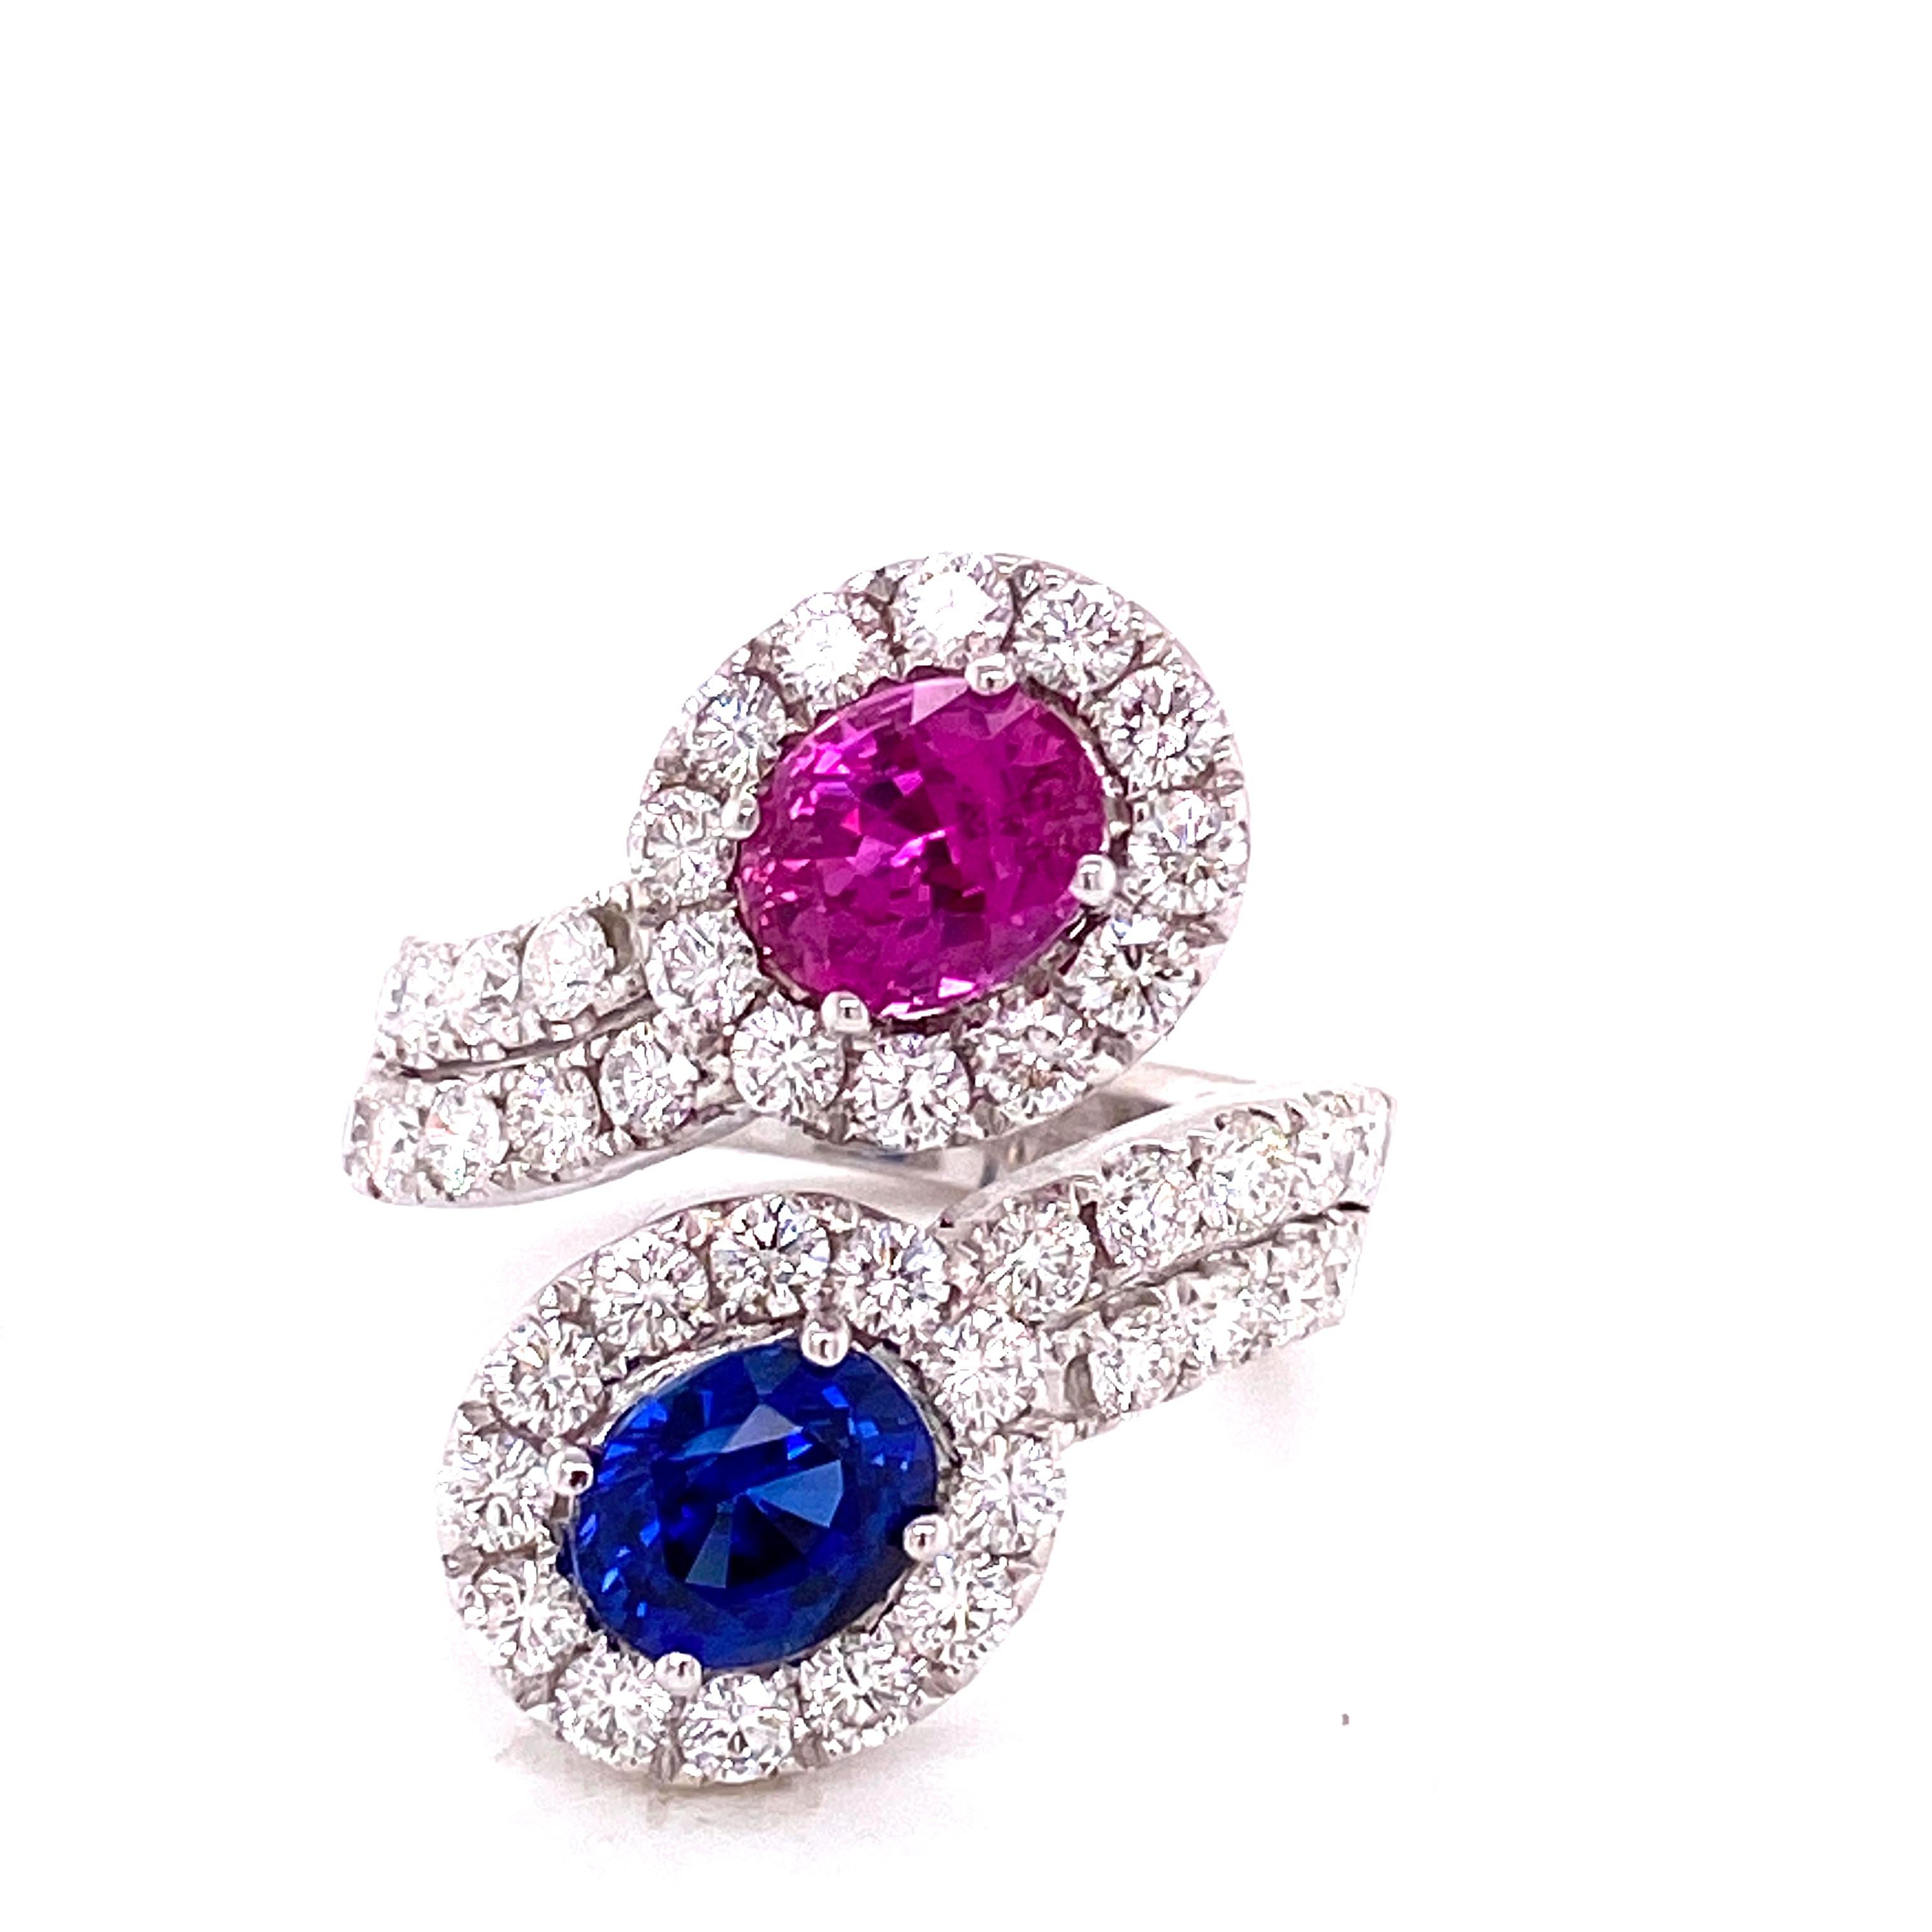 Contemporary GRS Certified 1.59 Carat Blue Sapphire and 1.54 Carat Pink Sapphire Diamond Ring For Sale